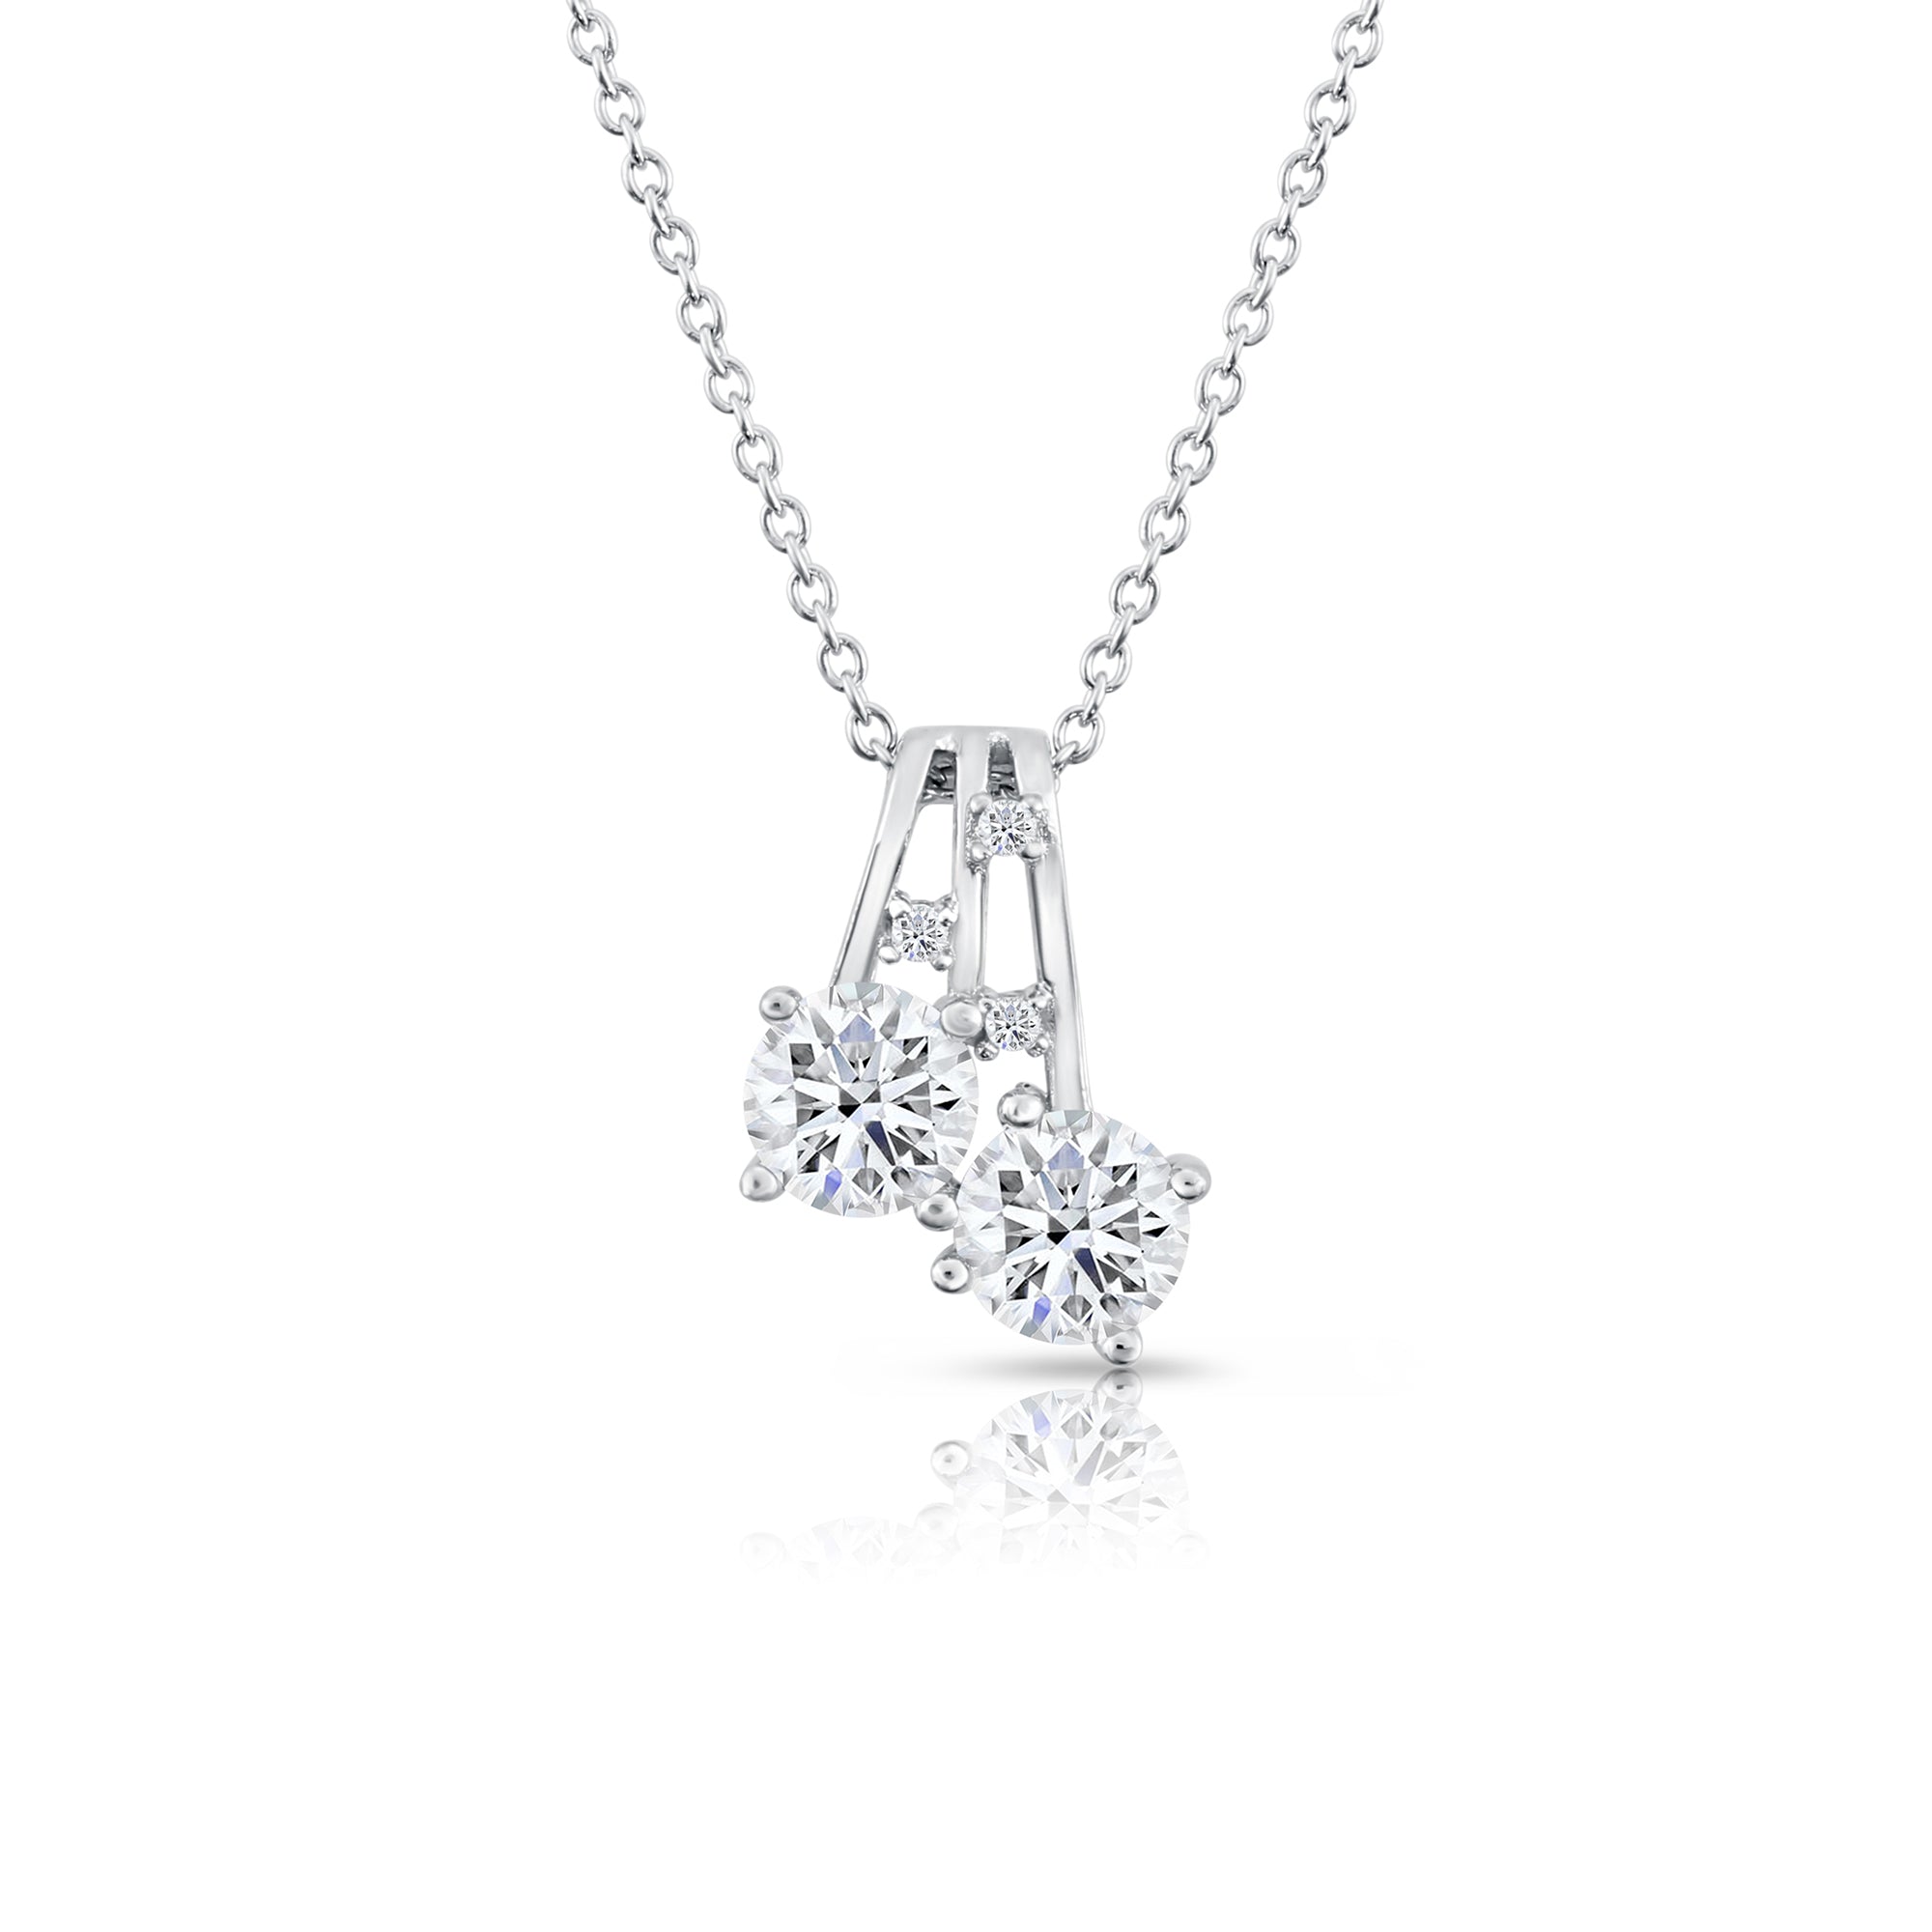 Cherries Charm Necklace with Simulated Diamond Cz in Sterling Silver